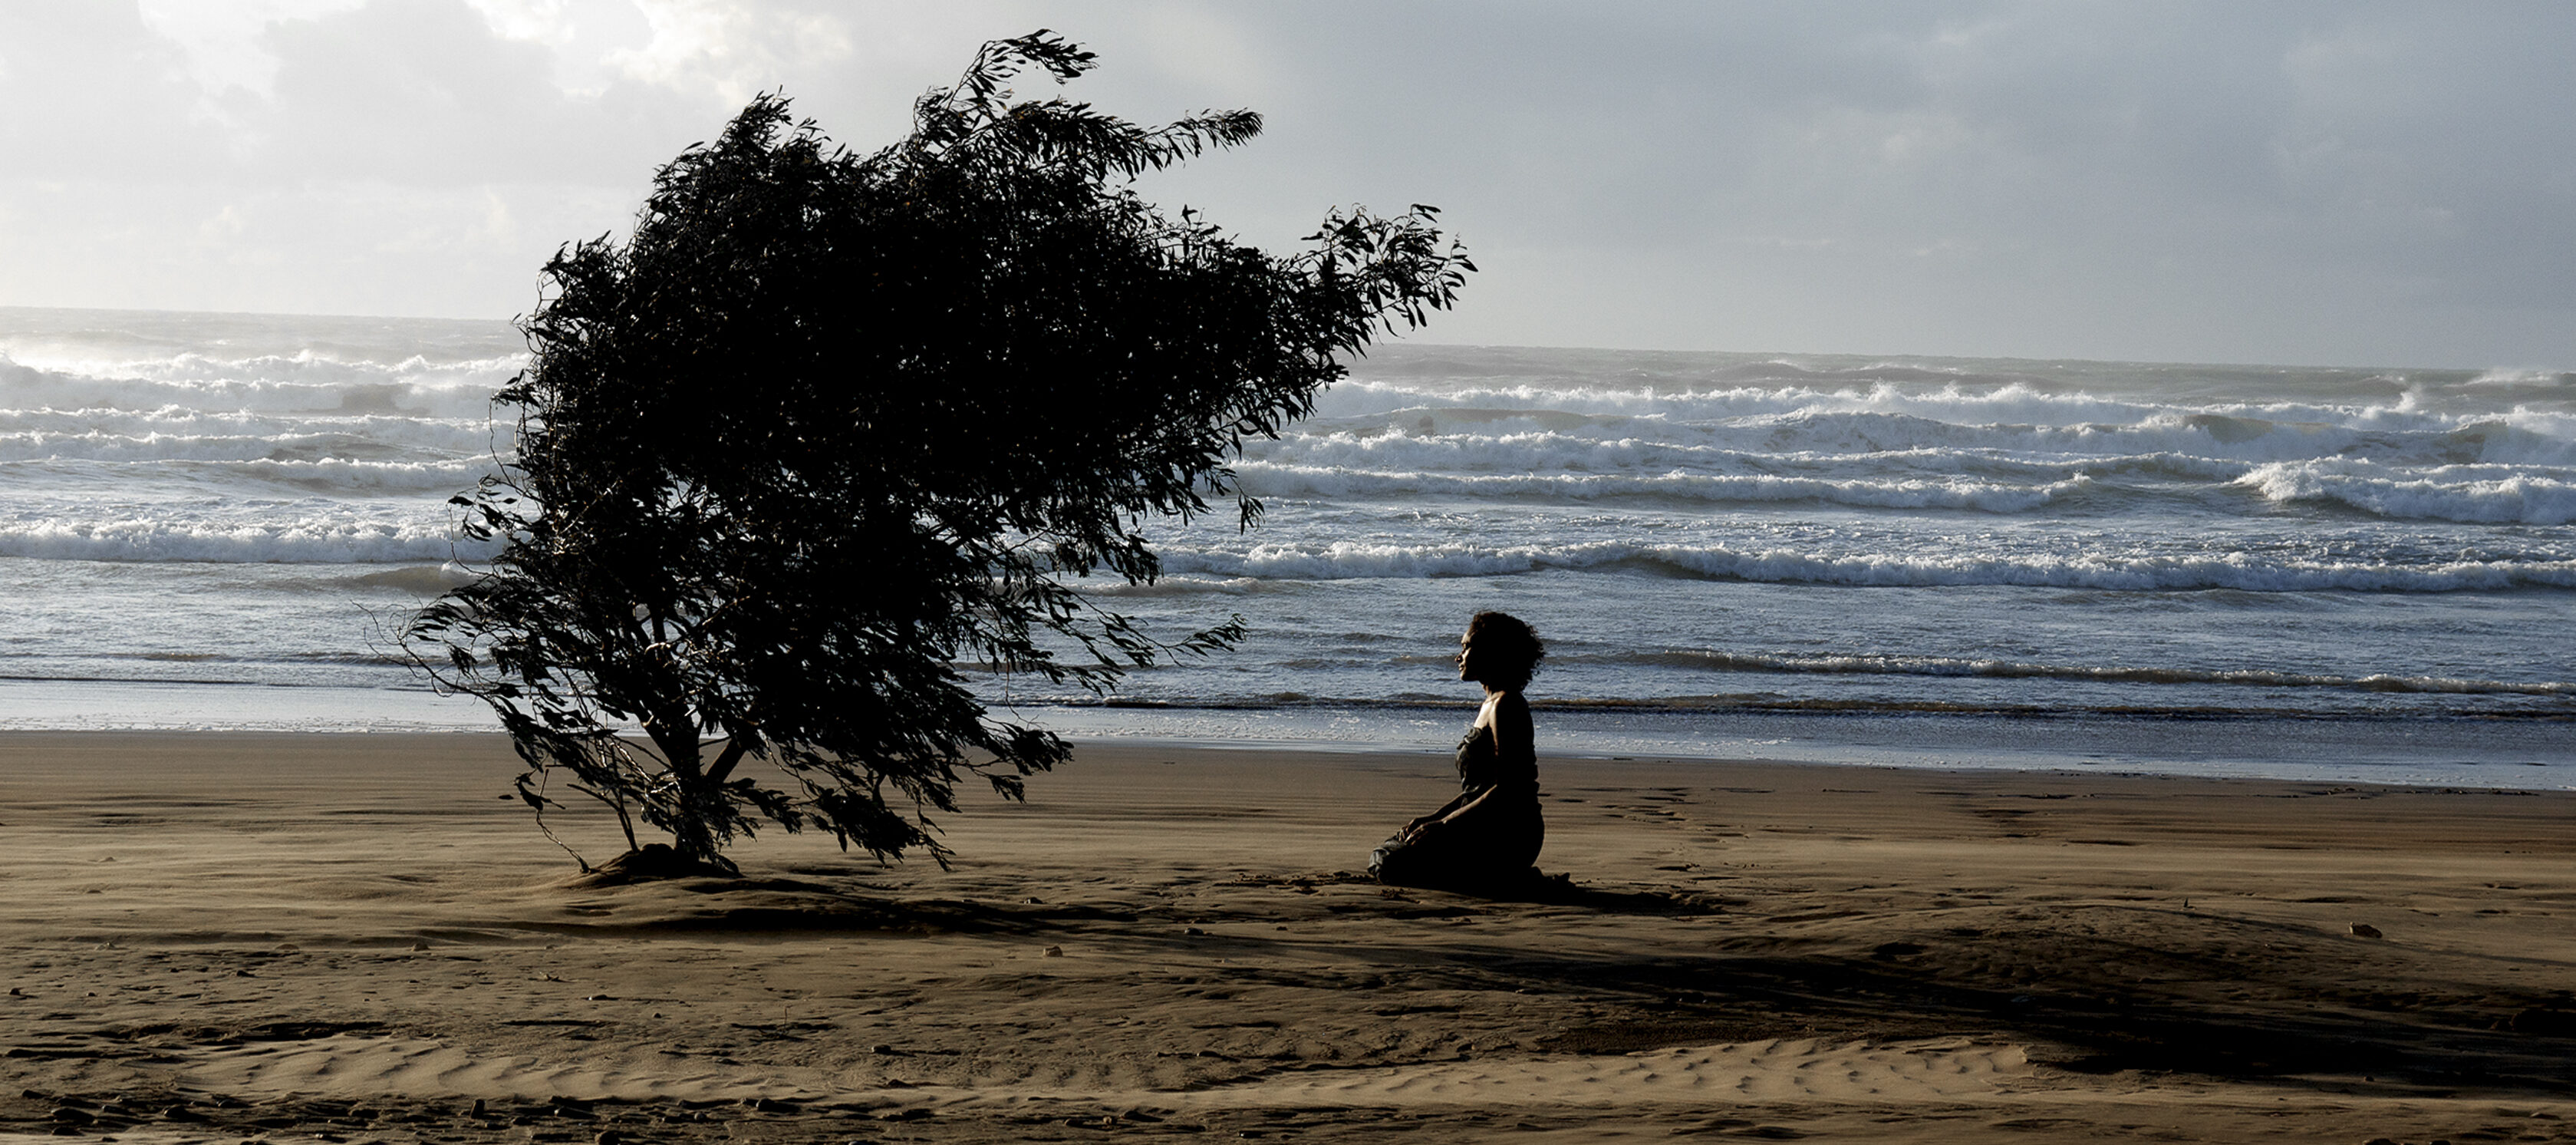 Tall photograph of a beach near sunset. The sky fades into the beach, which fades into darkness for the bottom third of the photograph. The focal point is a single tree in shadow with a figure kneeling below its branches.